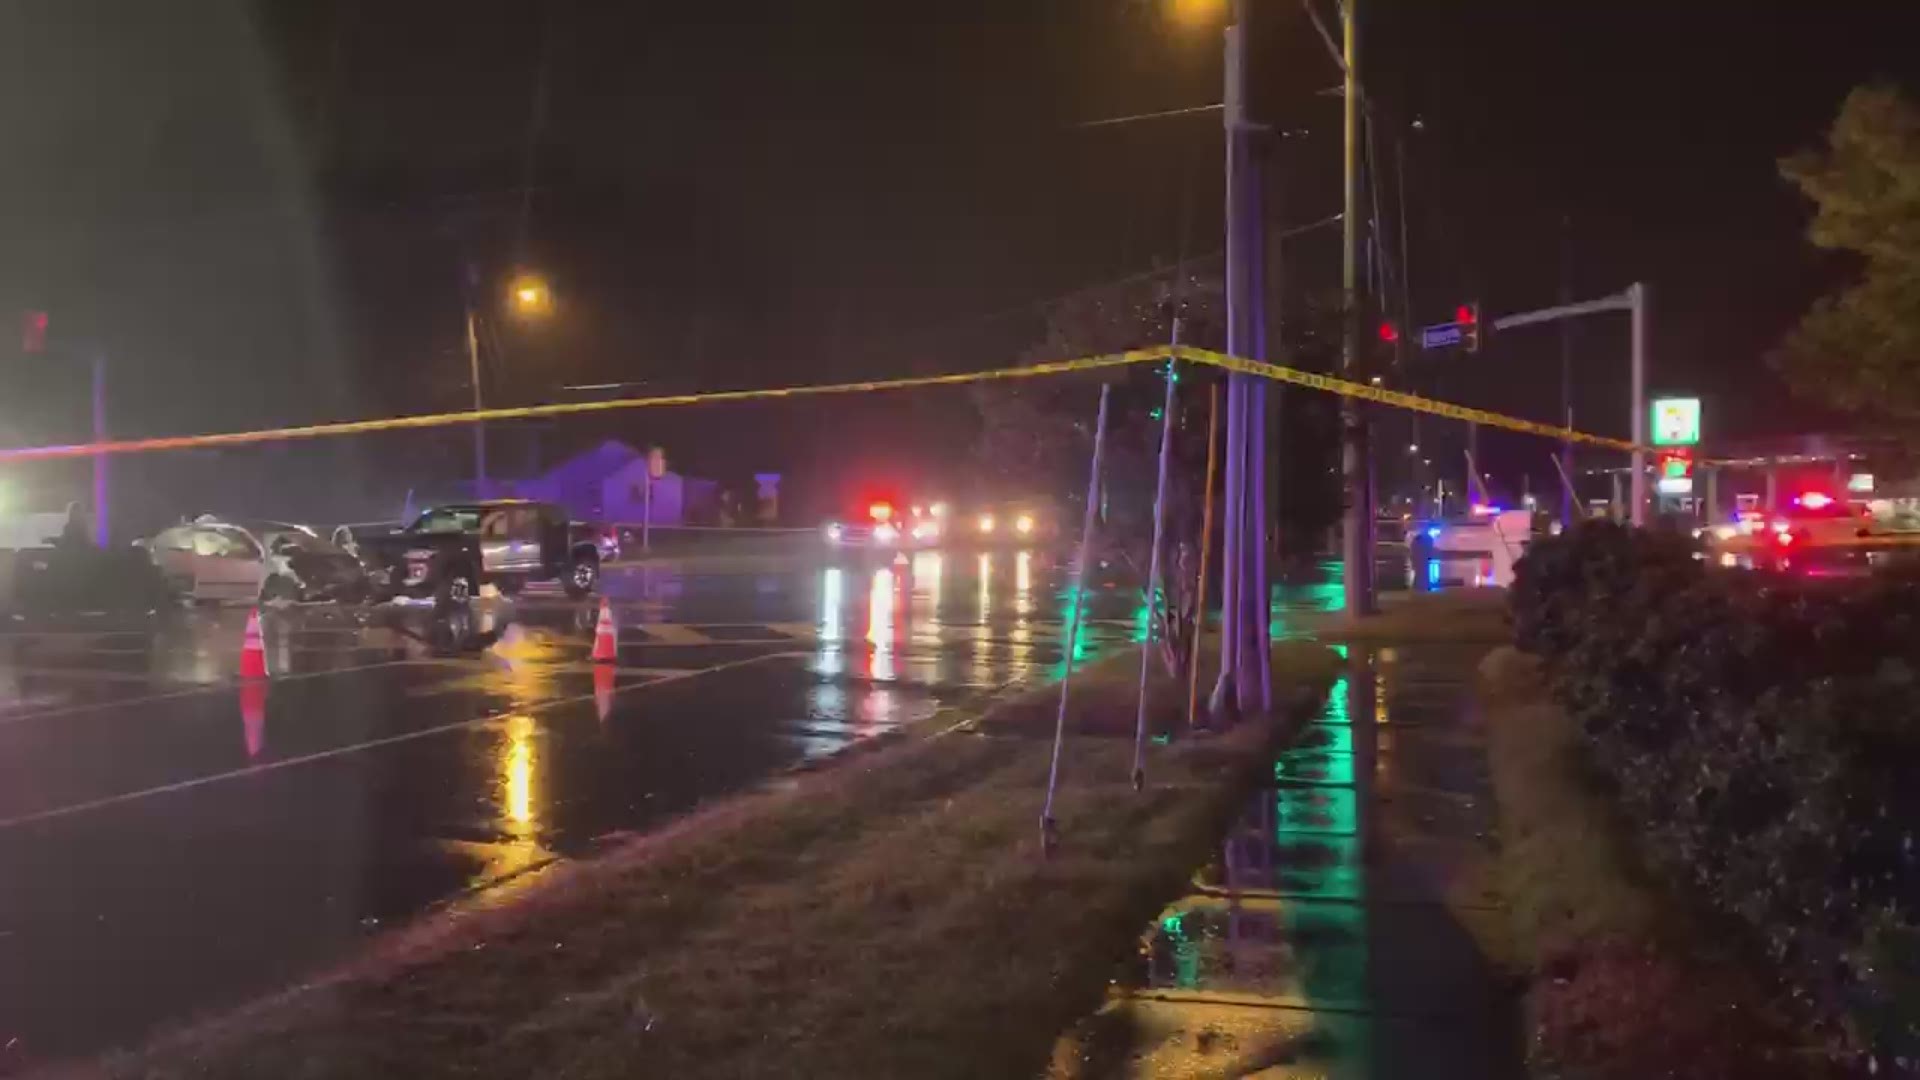 Hampton police officers said someone died at the scene of a crash at the intersection of Woodland Road and E. Mercury Boulevard. Several other people were hurt.